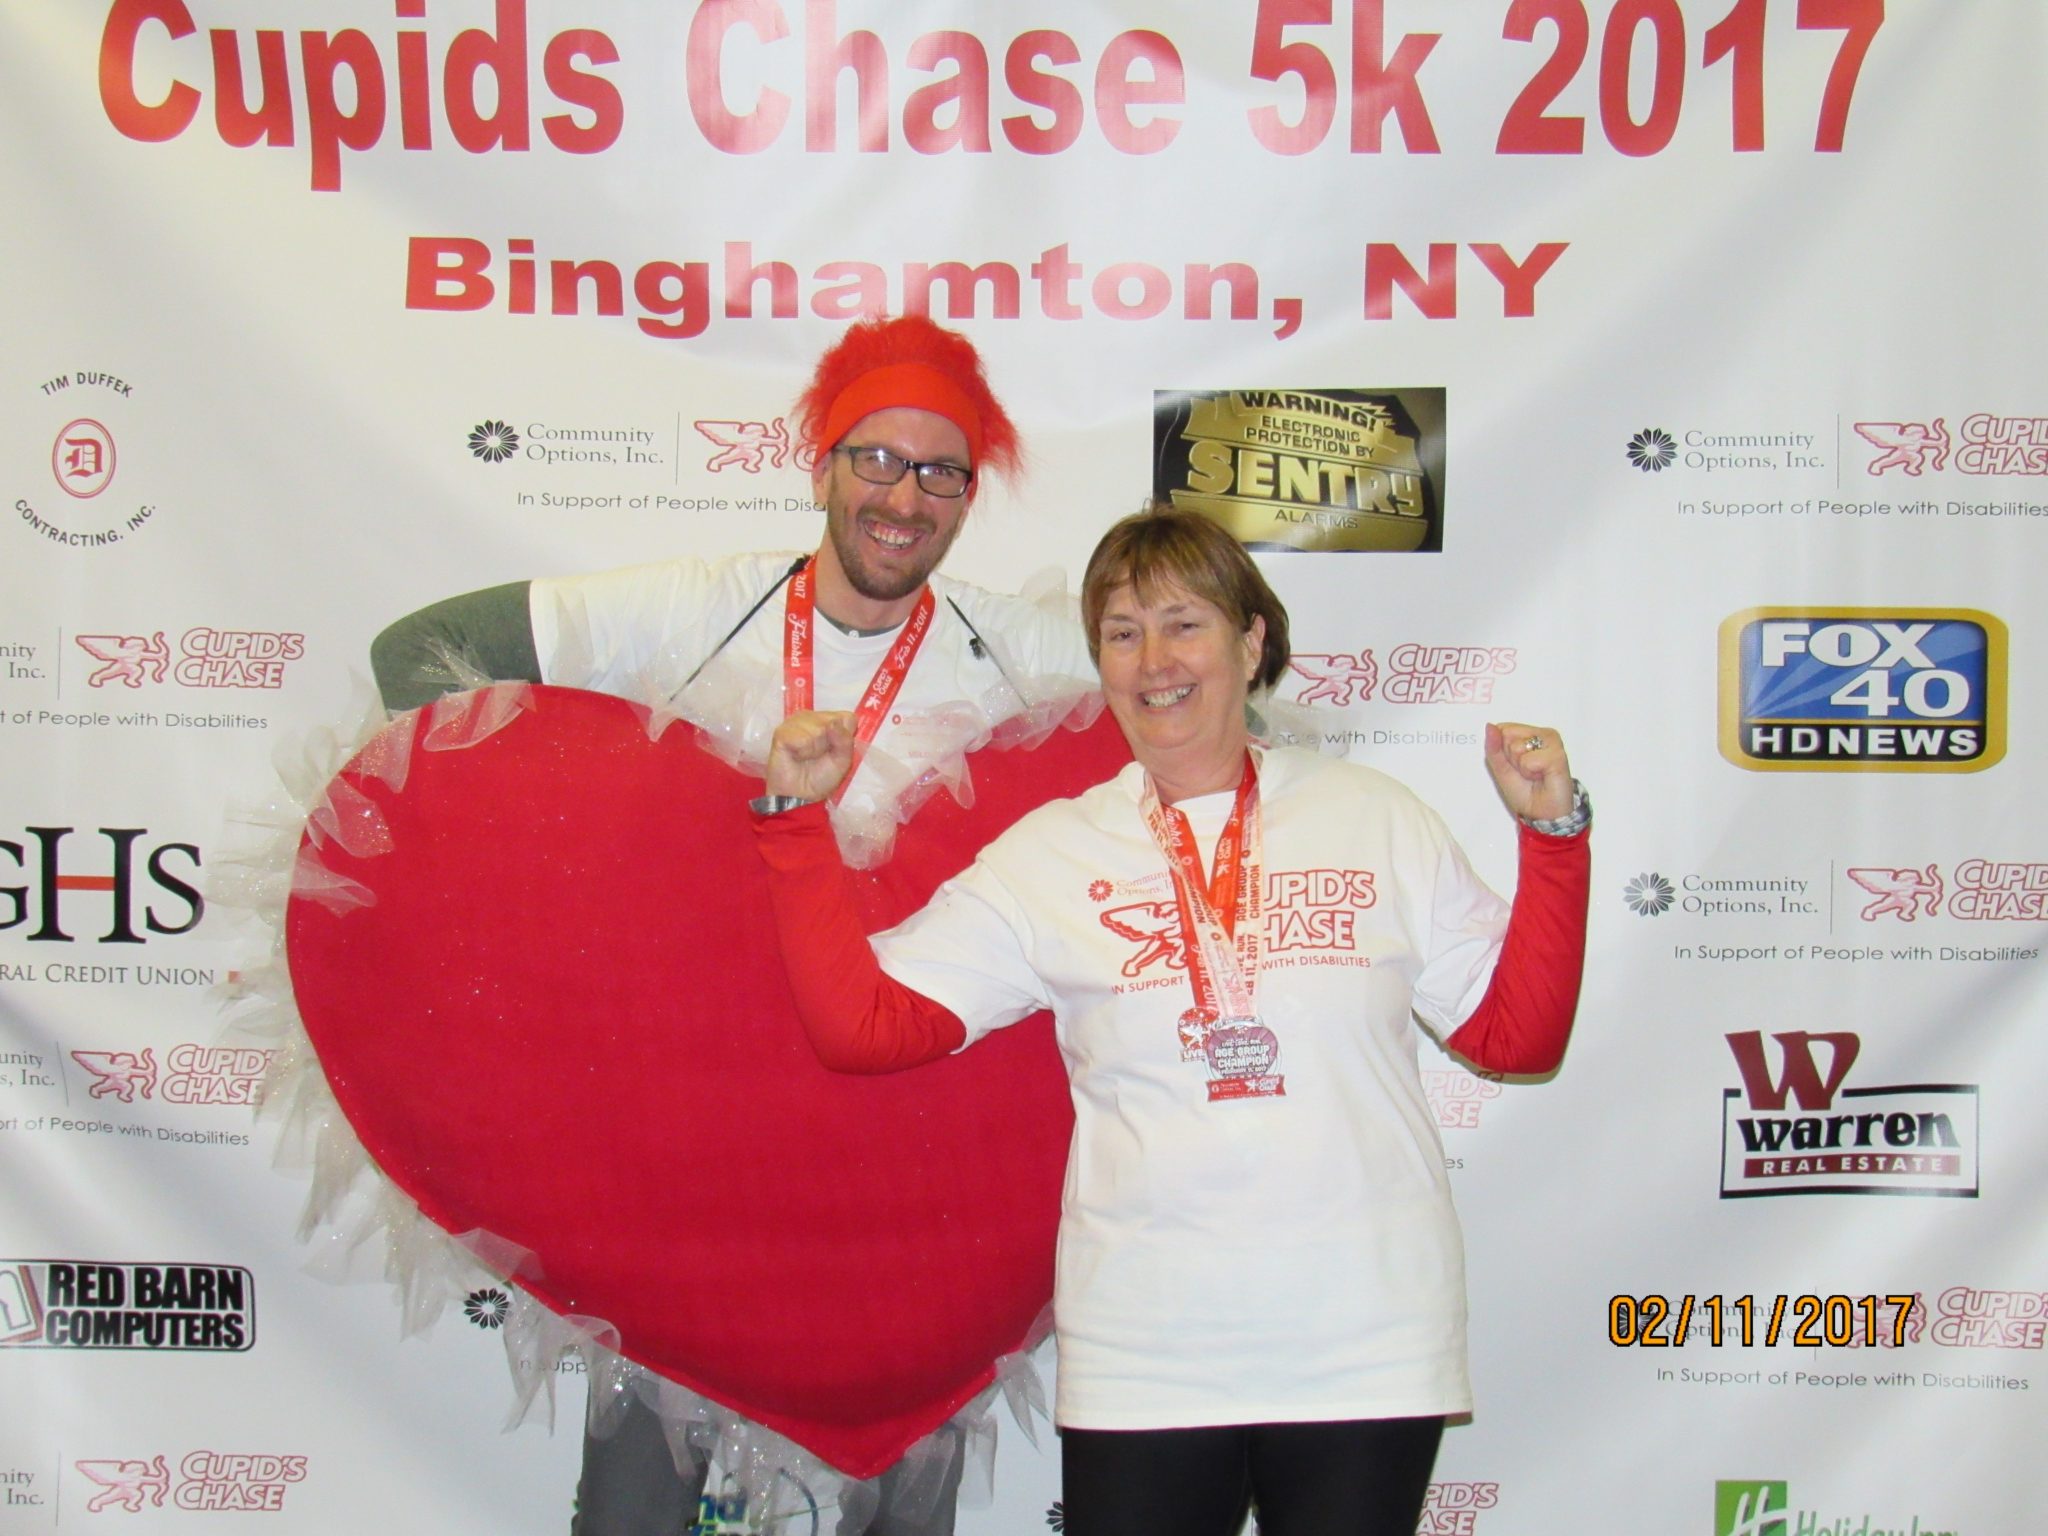 9th Annual Cupid’s Chase 5K